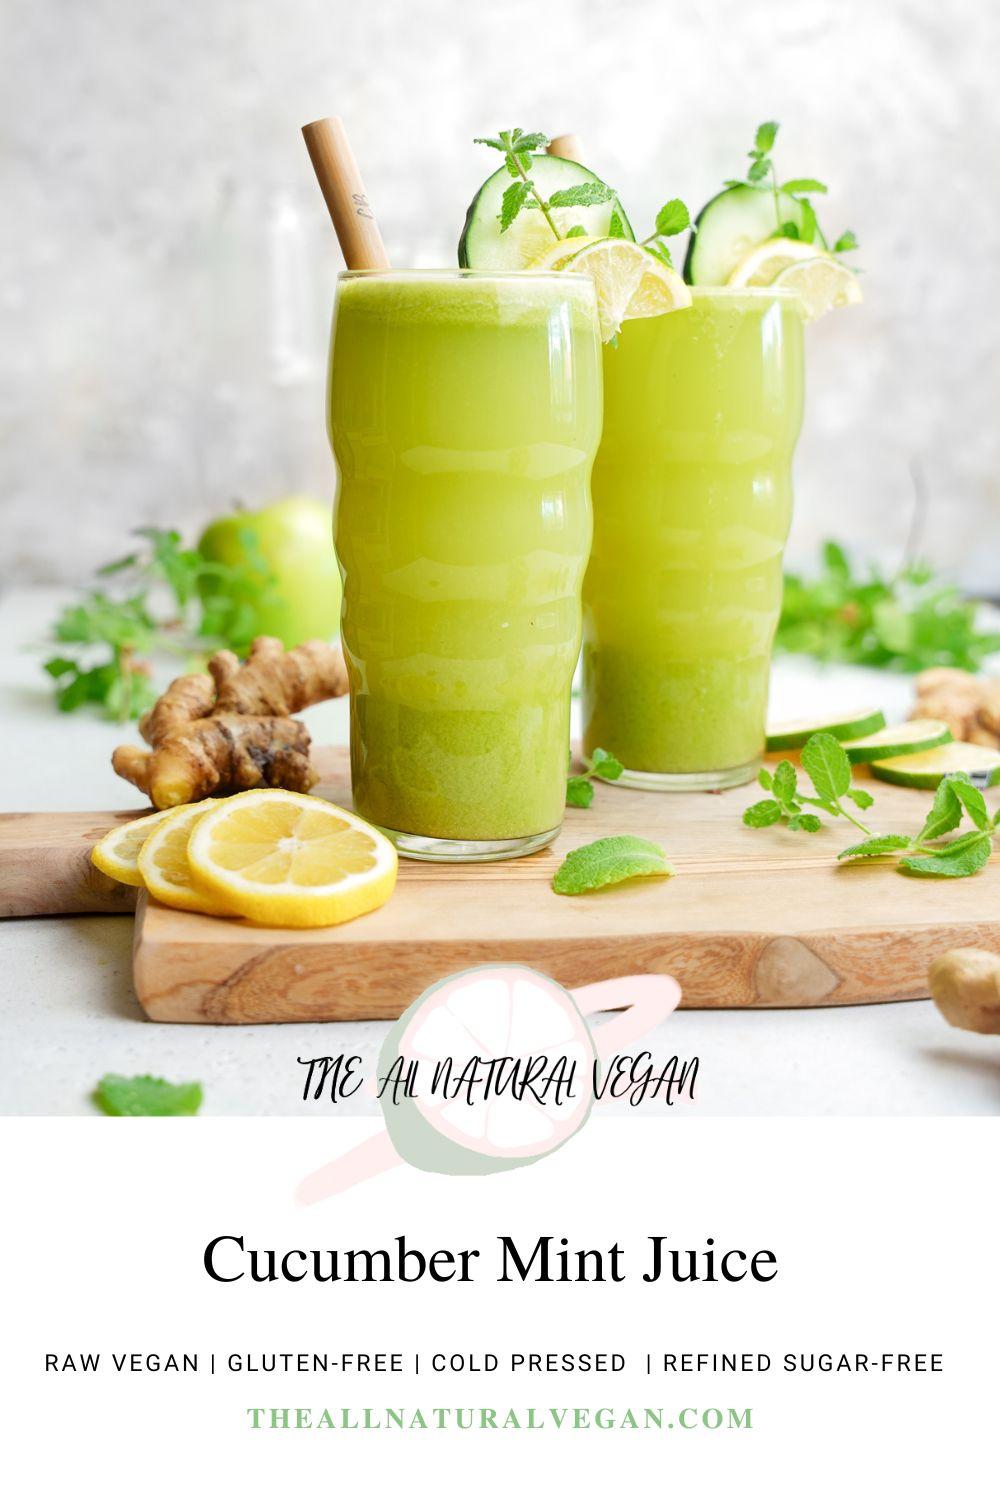 cucumber mint juice recipe card stating this recipe is cold pressed, raw vegan, gluten-free, and refined sugar-free